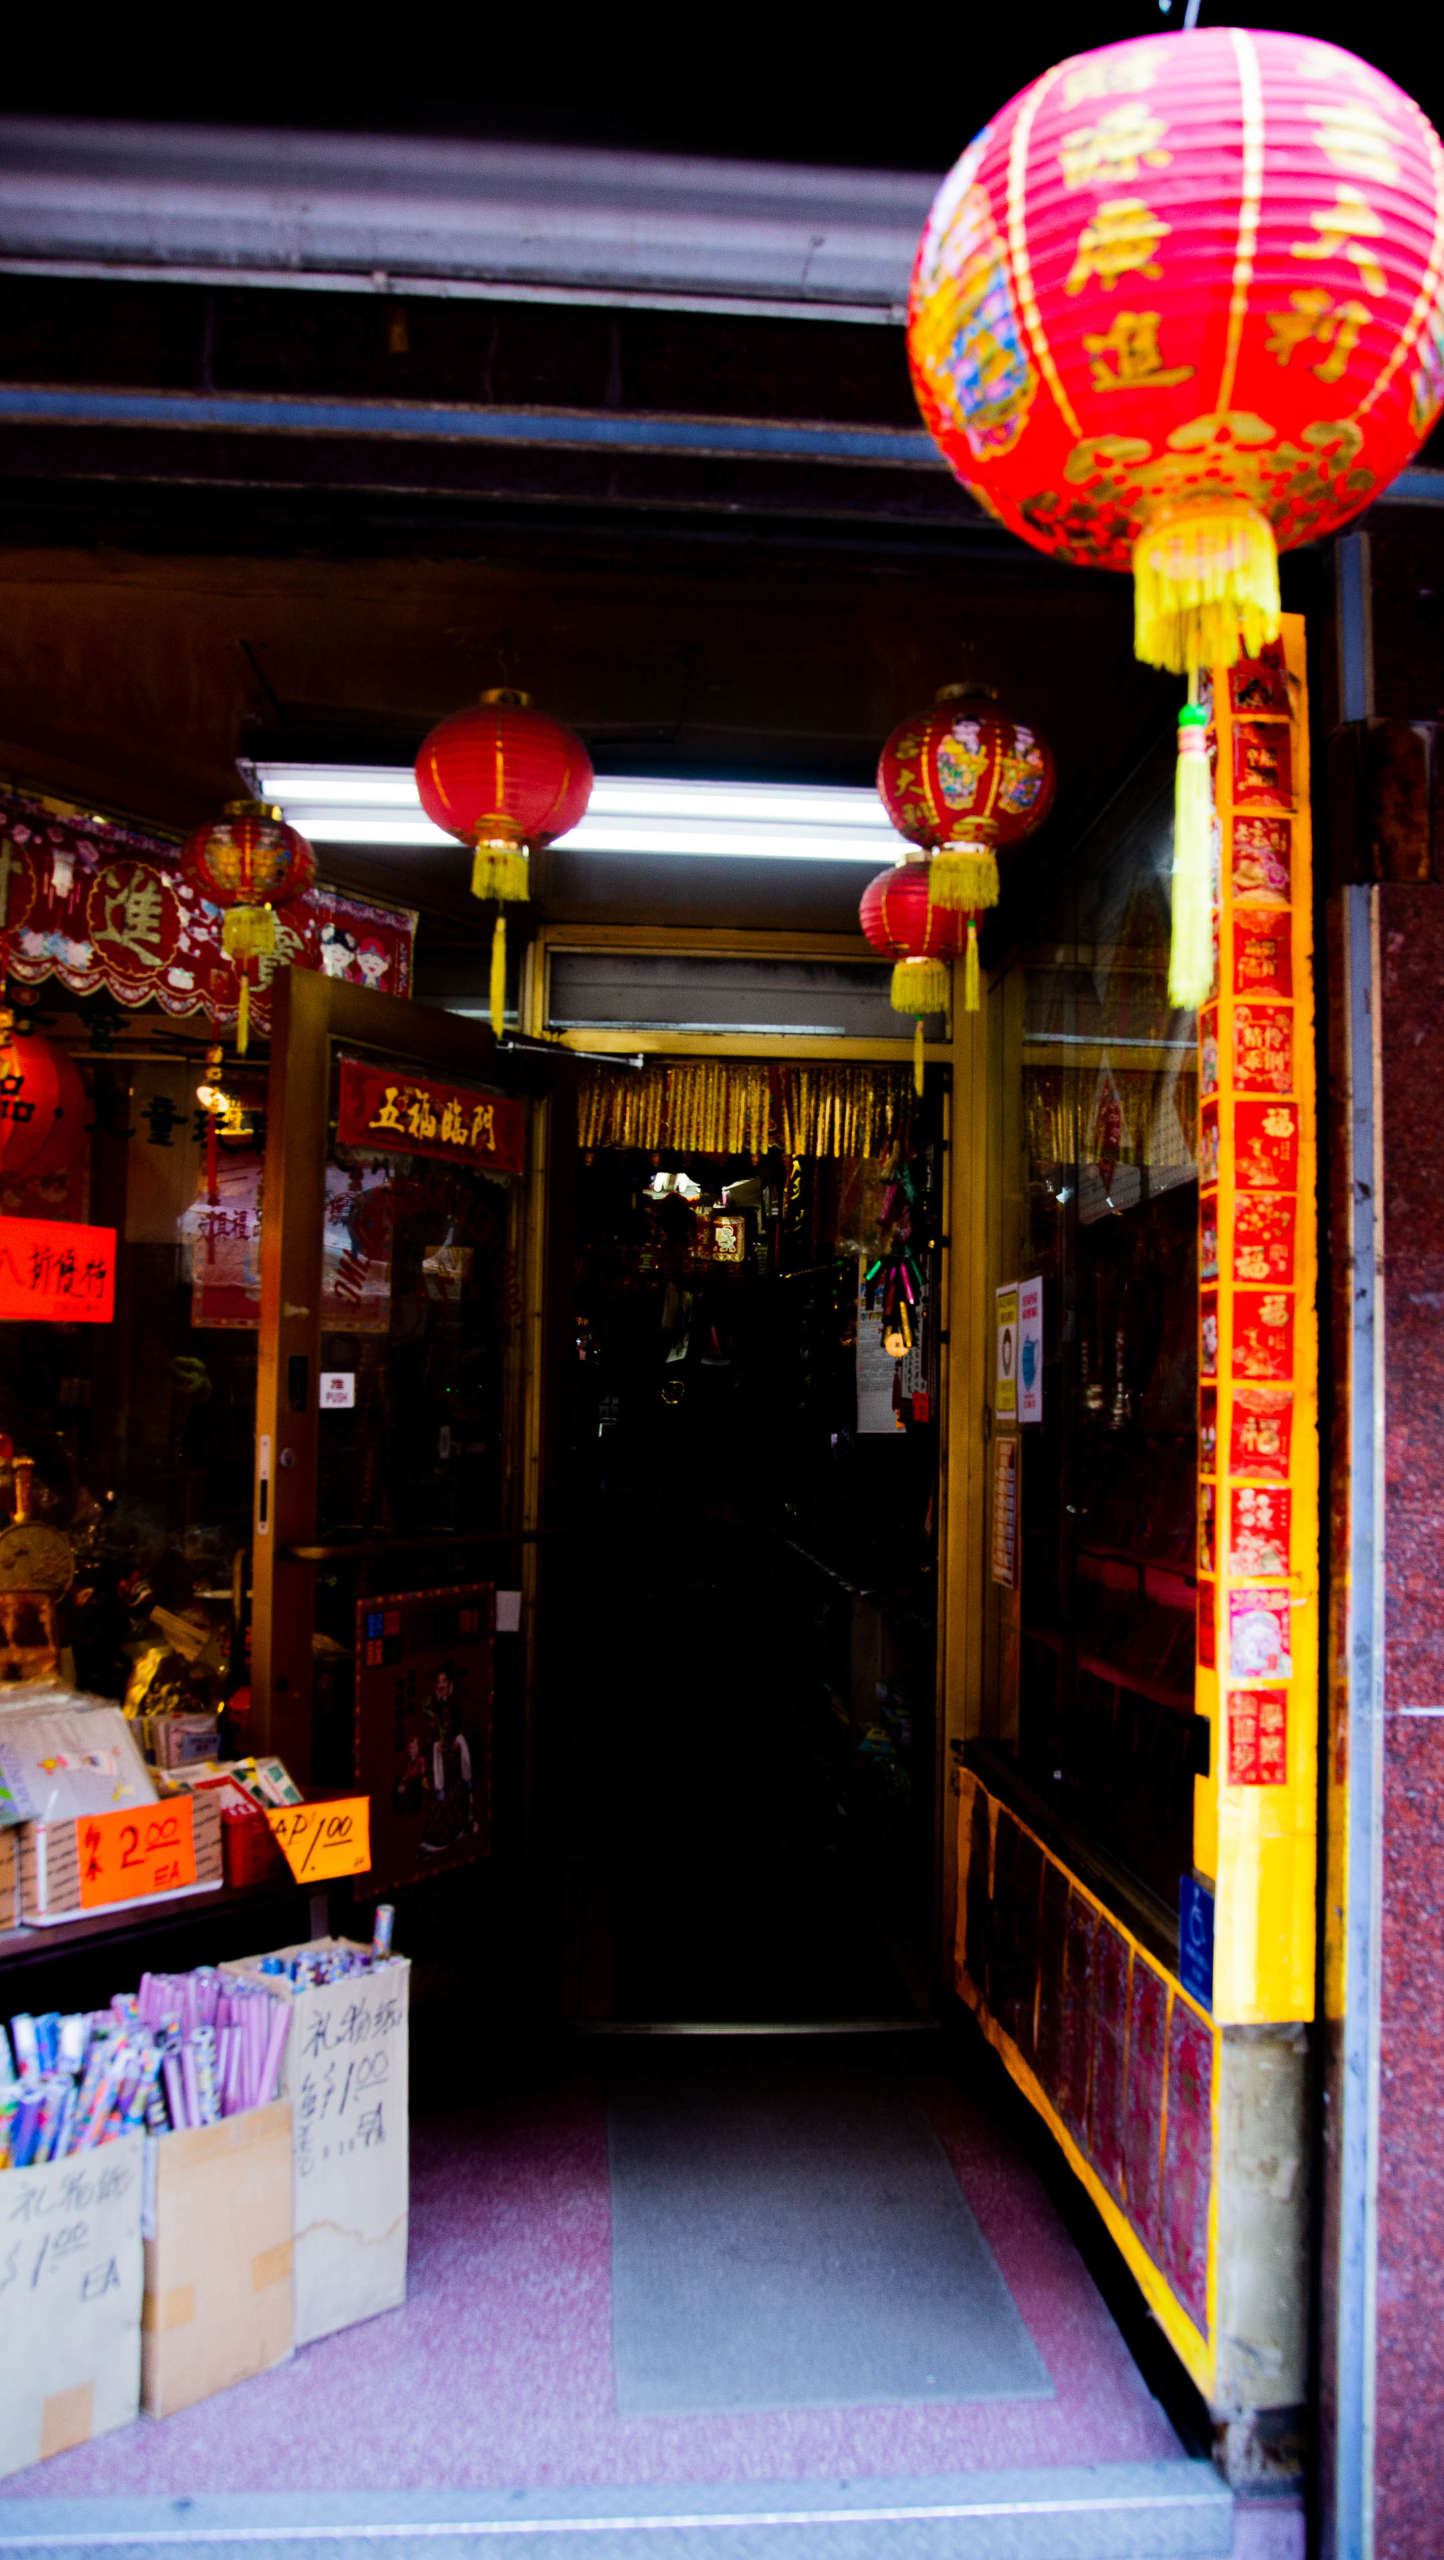 Red paper lanterns hang at the entrance to a storefront in Chinatown, NYC. Boxes outside the door are filled with merchandise and labeled with prices. The store is decorated in red and gold.